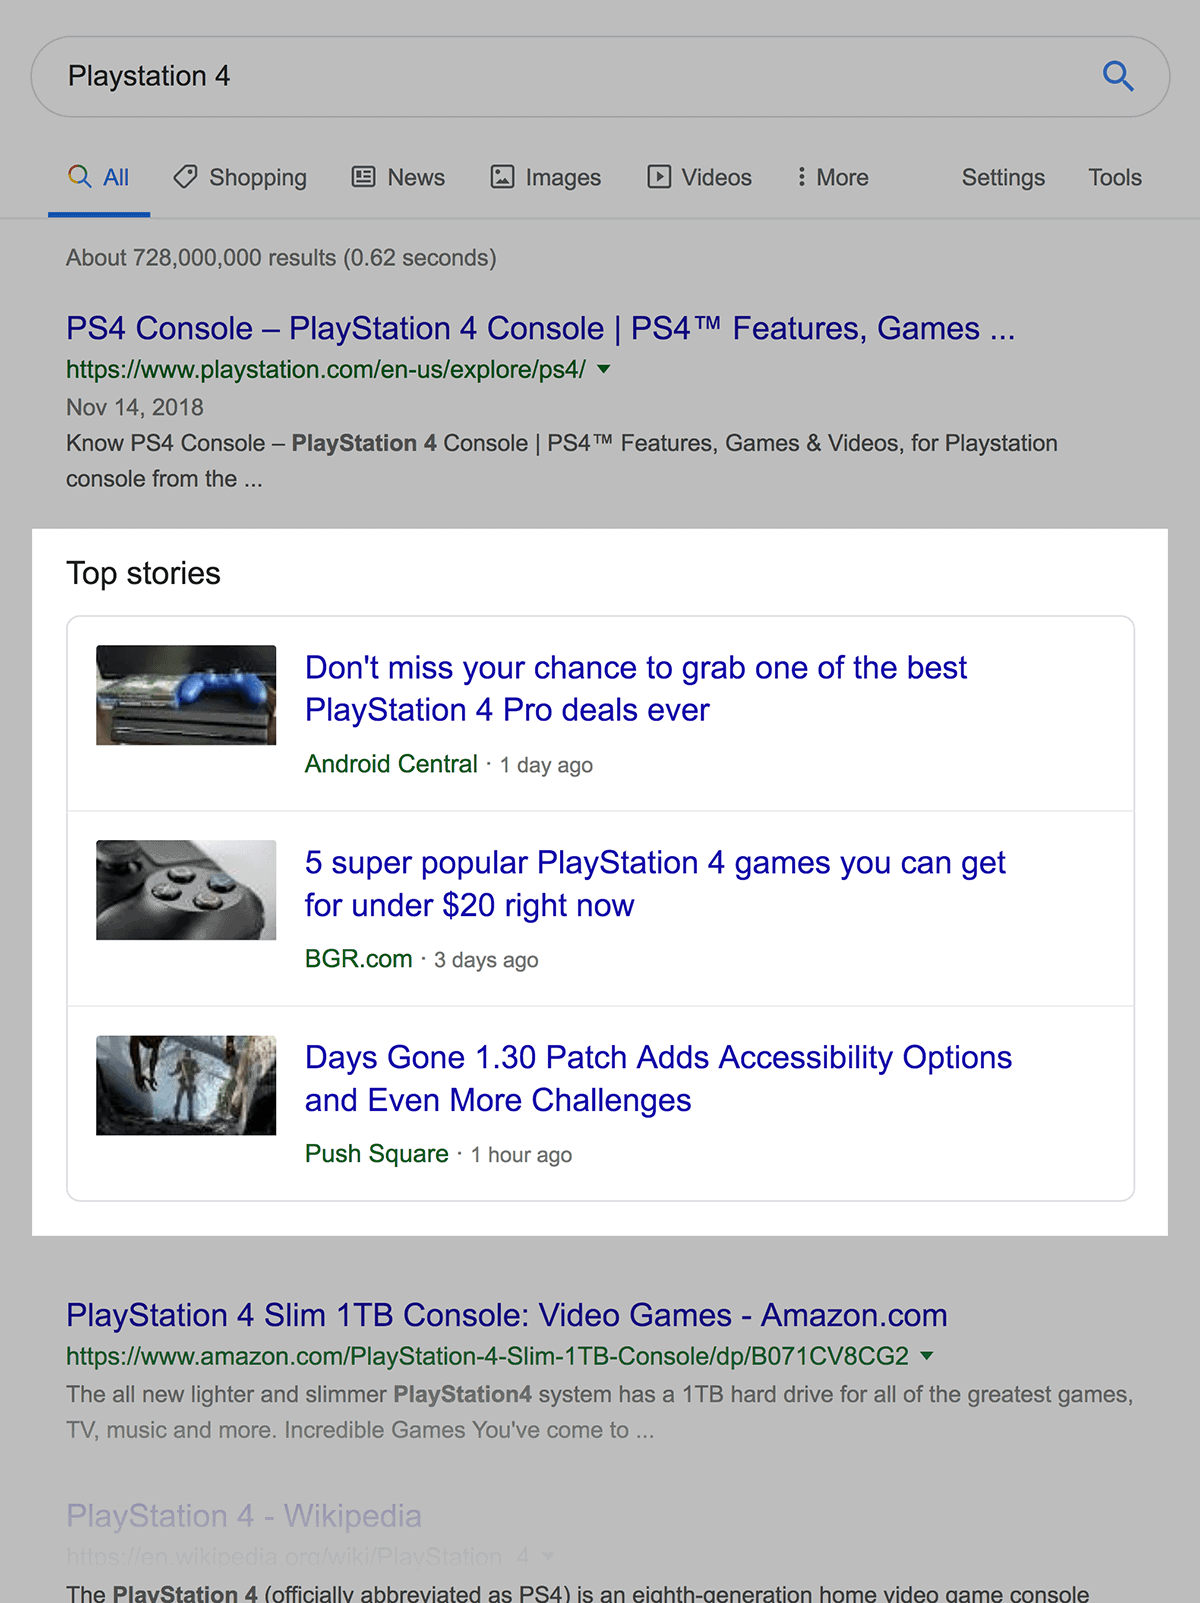 "Playstation 4" Top Stories